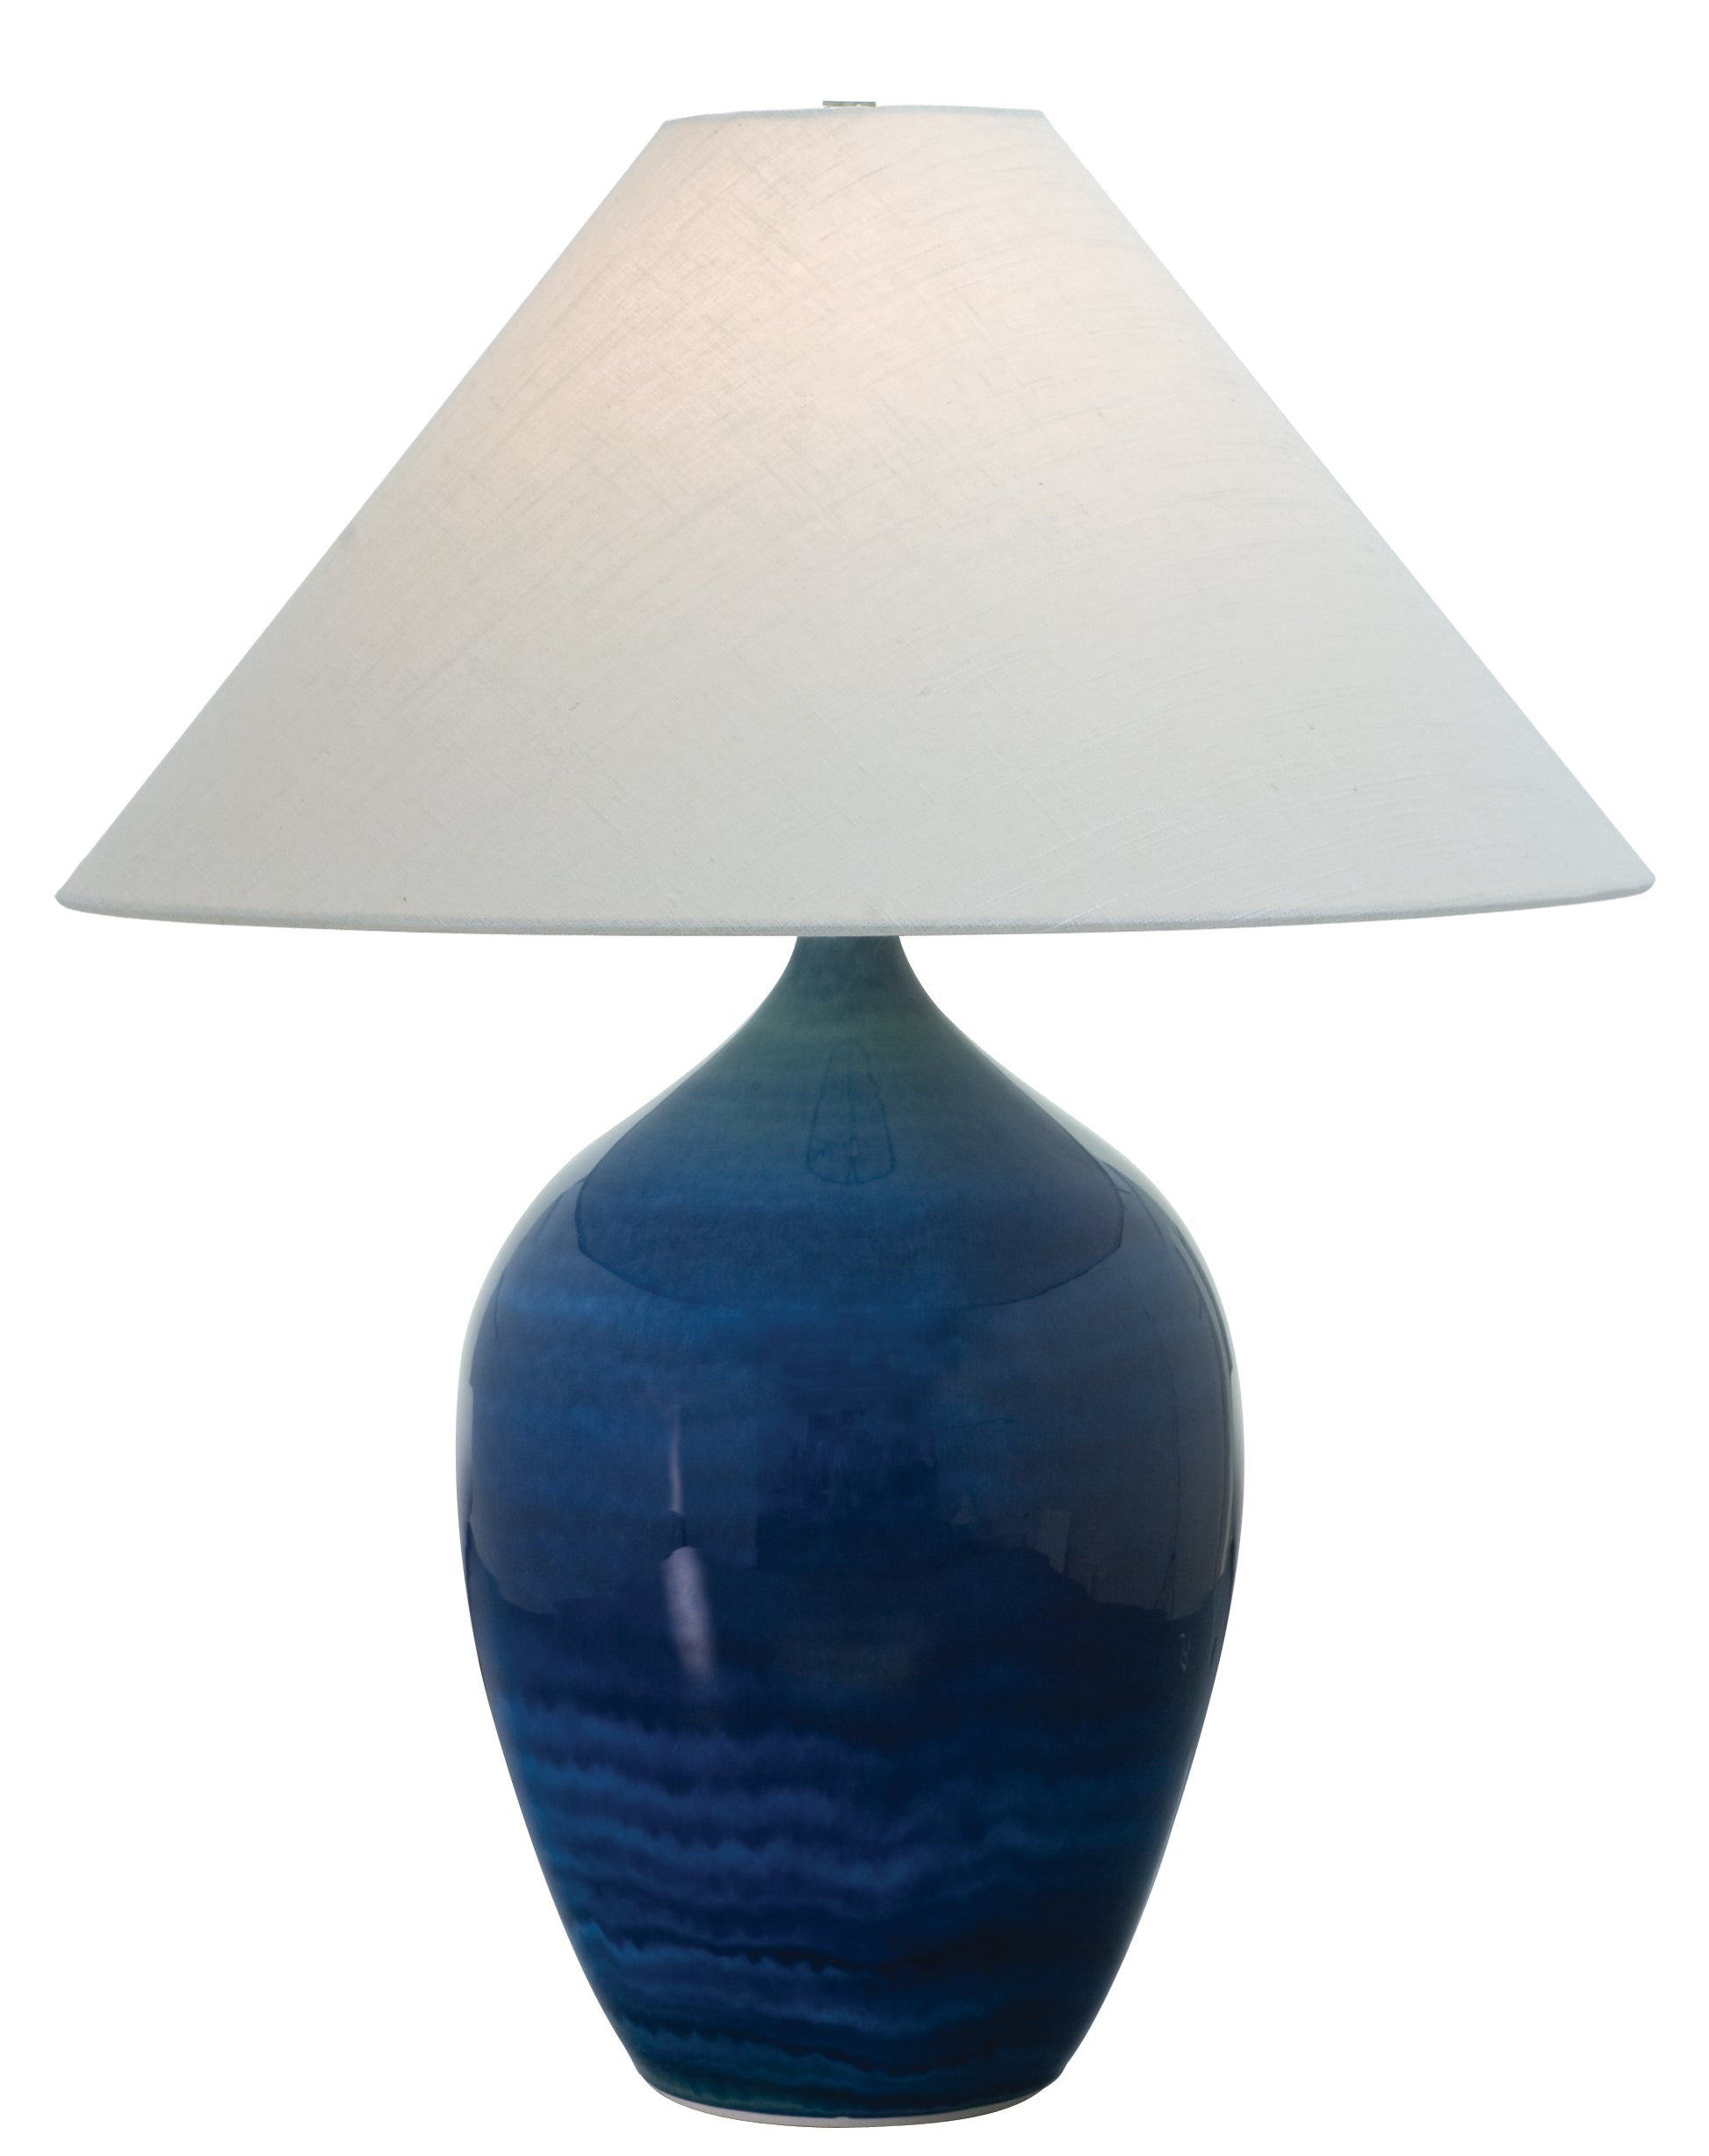 House of Troy Scatchard 29" Stoneware Table Lamp in Blue Gloss GS190-BG